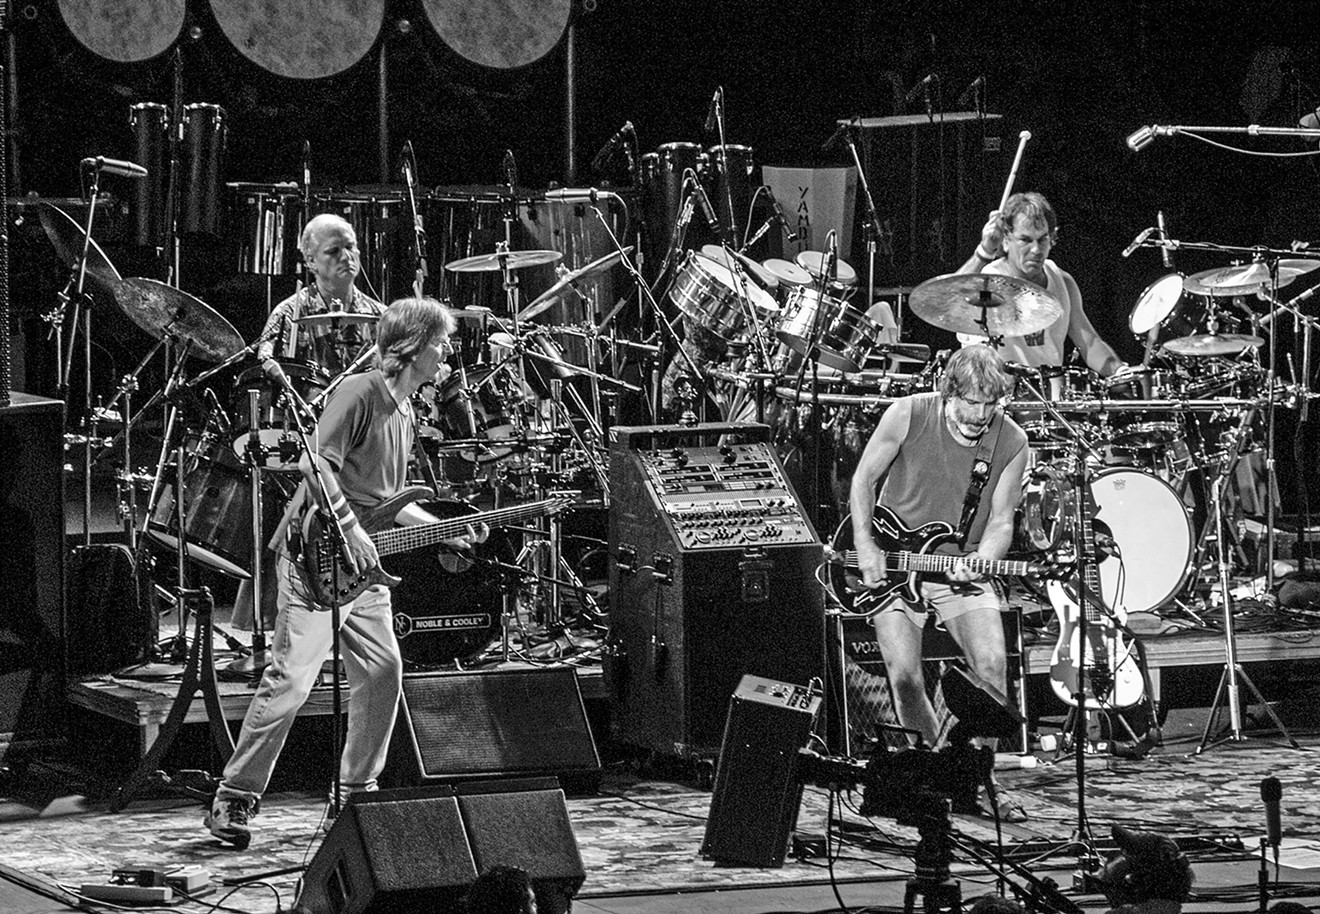 The "Core Four" back together -seemingly in harmony - at Alpine Valley in 2002 (l to r): Bill Kreutzmann, Phil Lesh, Bob Weir, and Mickey Hart.